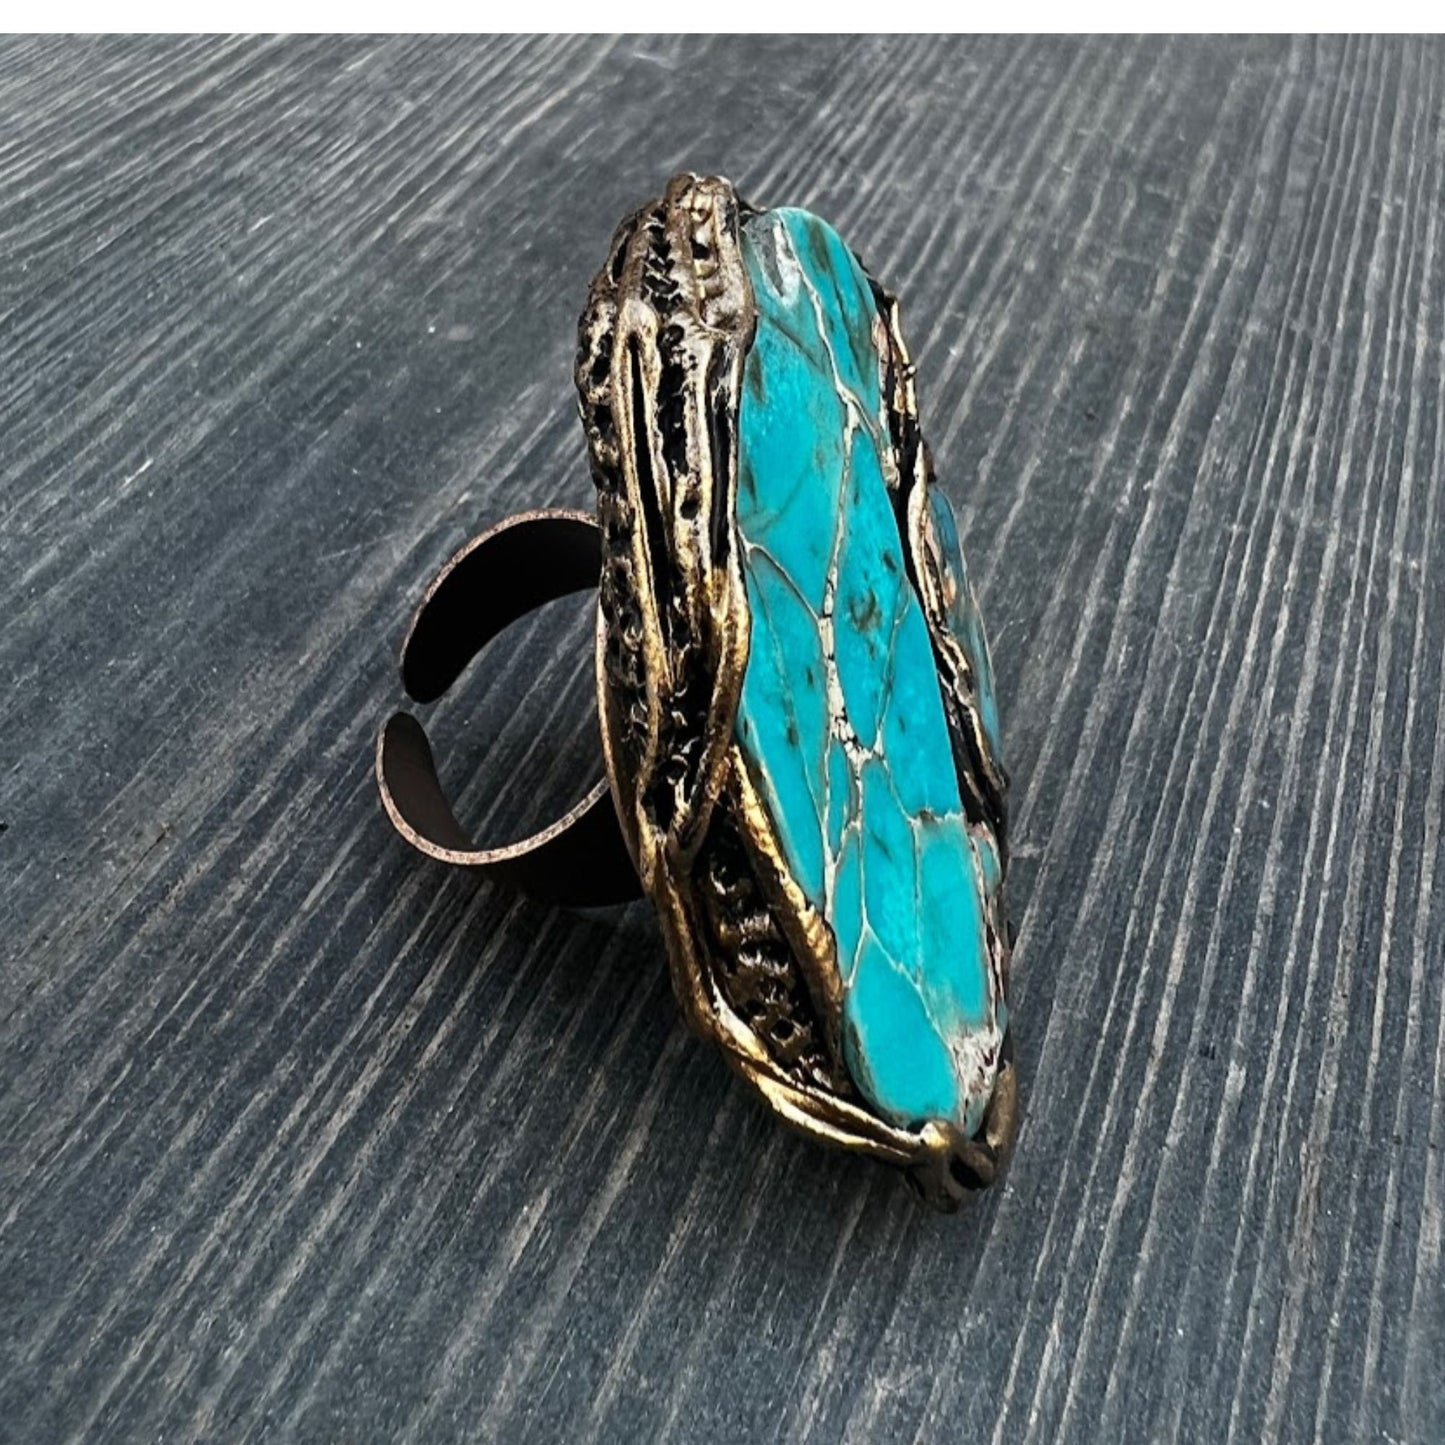 Blue Turquoise and Jasper Large Stone Chunky Ring, Oversized Cocktail Ring